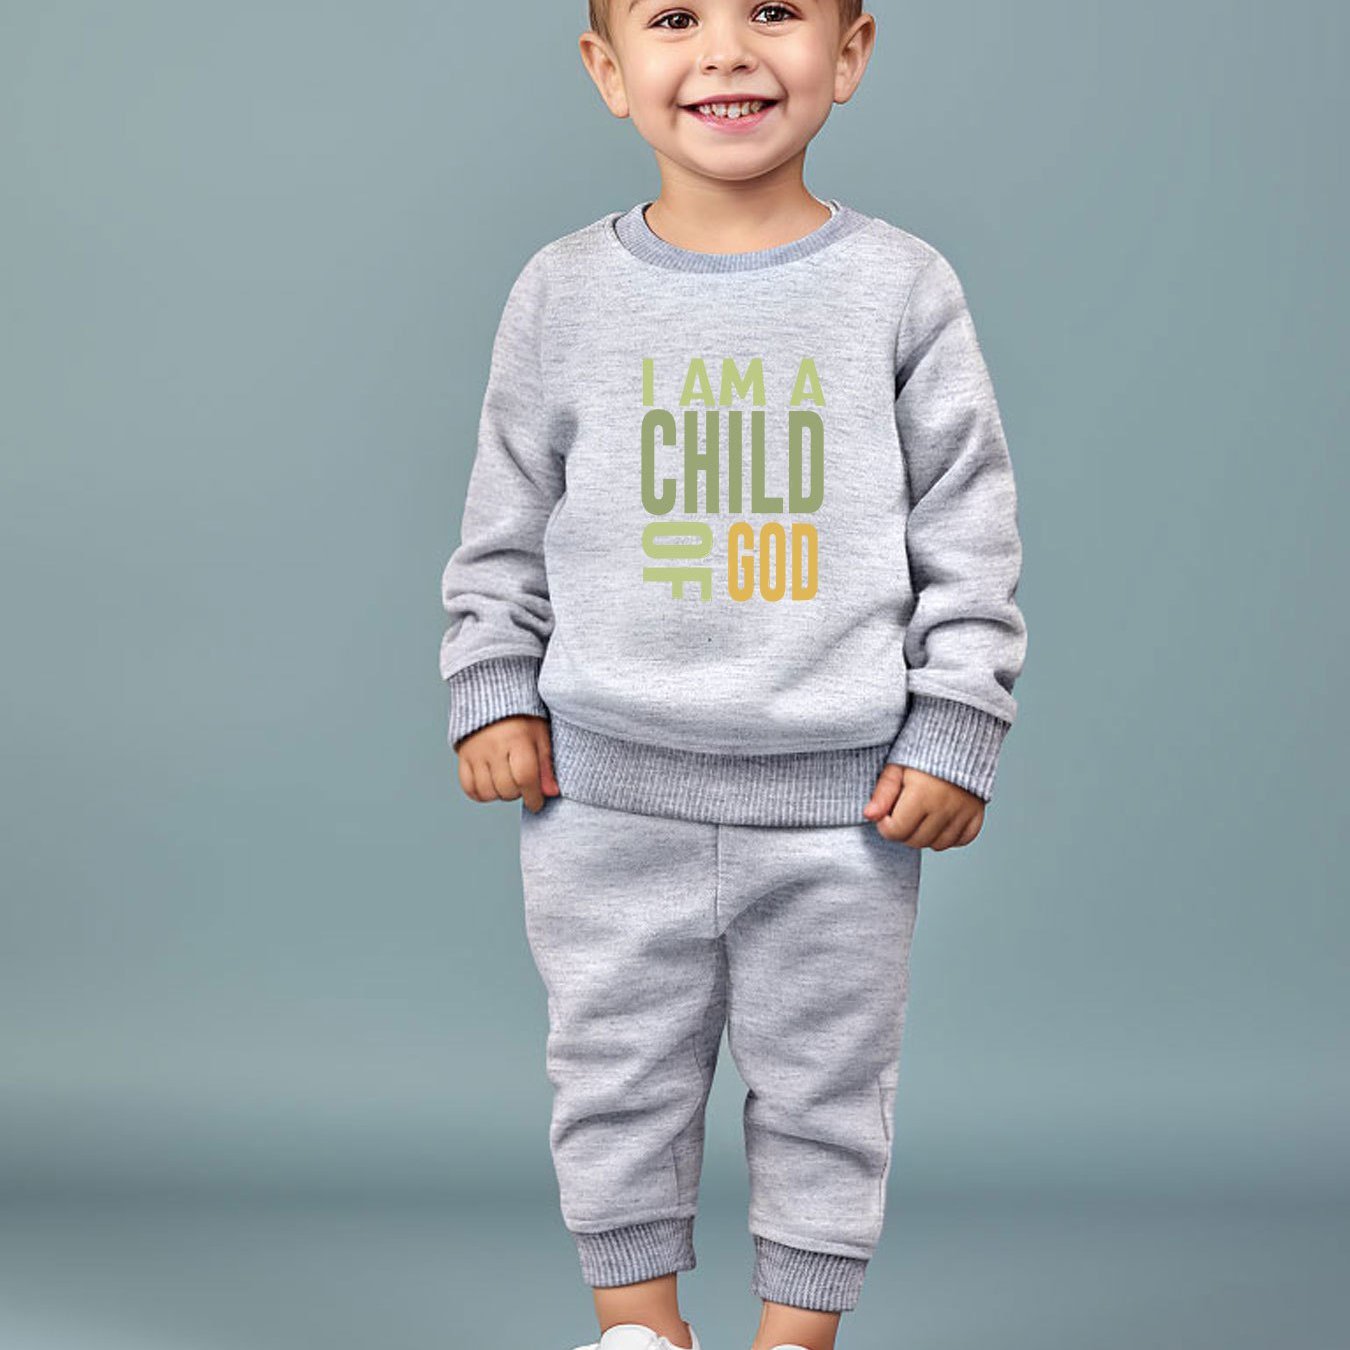 I AM A CHILD OF GOD Youth Christian Casual Outfit claimedbygoddesigns